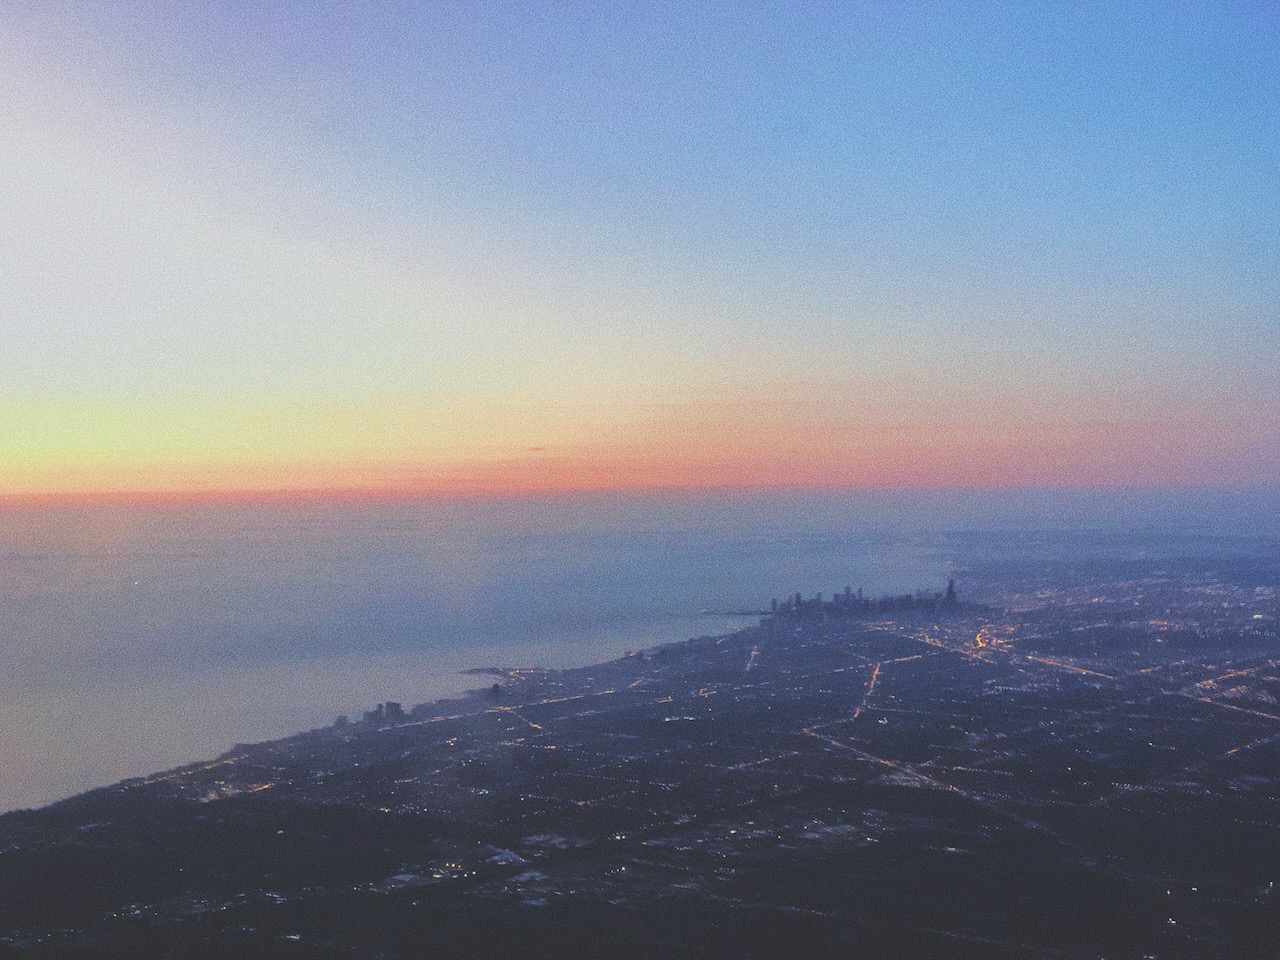 Chicago sunrise approach, photo 1 of 3